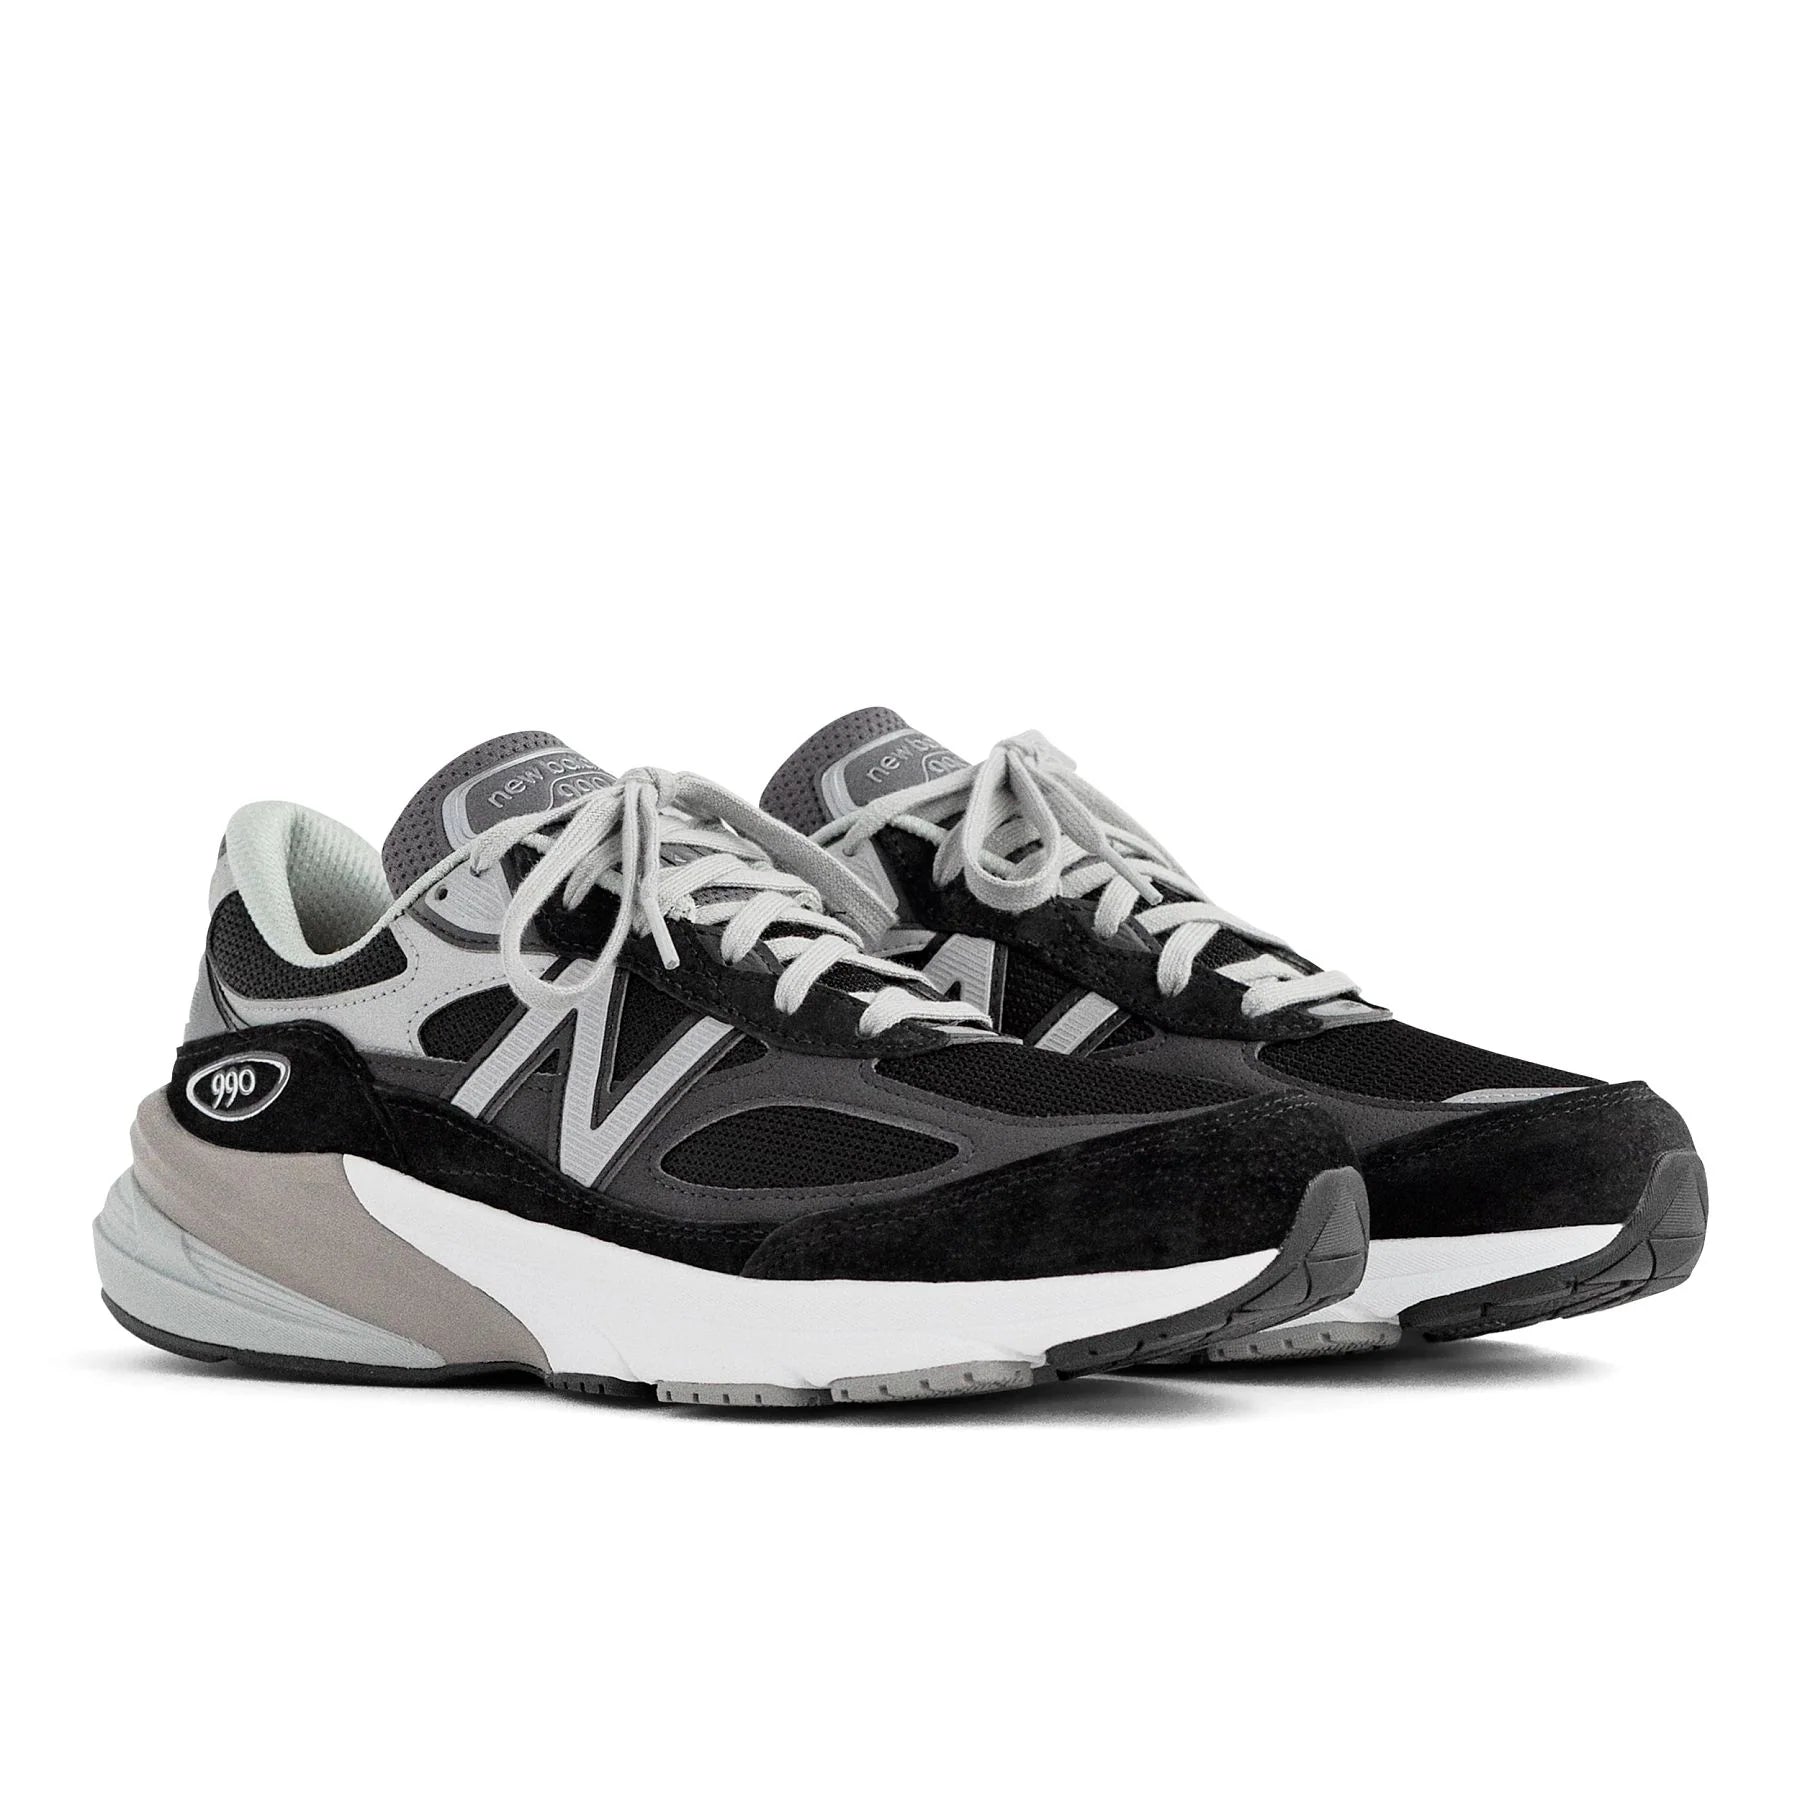 Front angle view of the Men's New Balance 990 V6 lifestyle shoe in the color Black/White